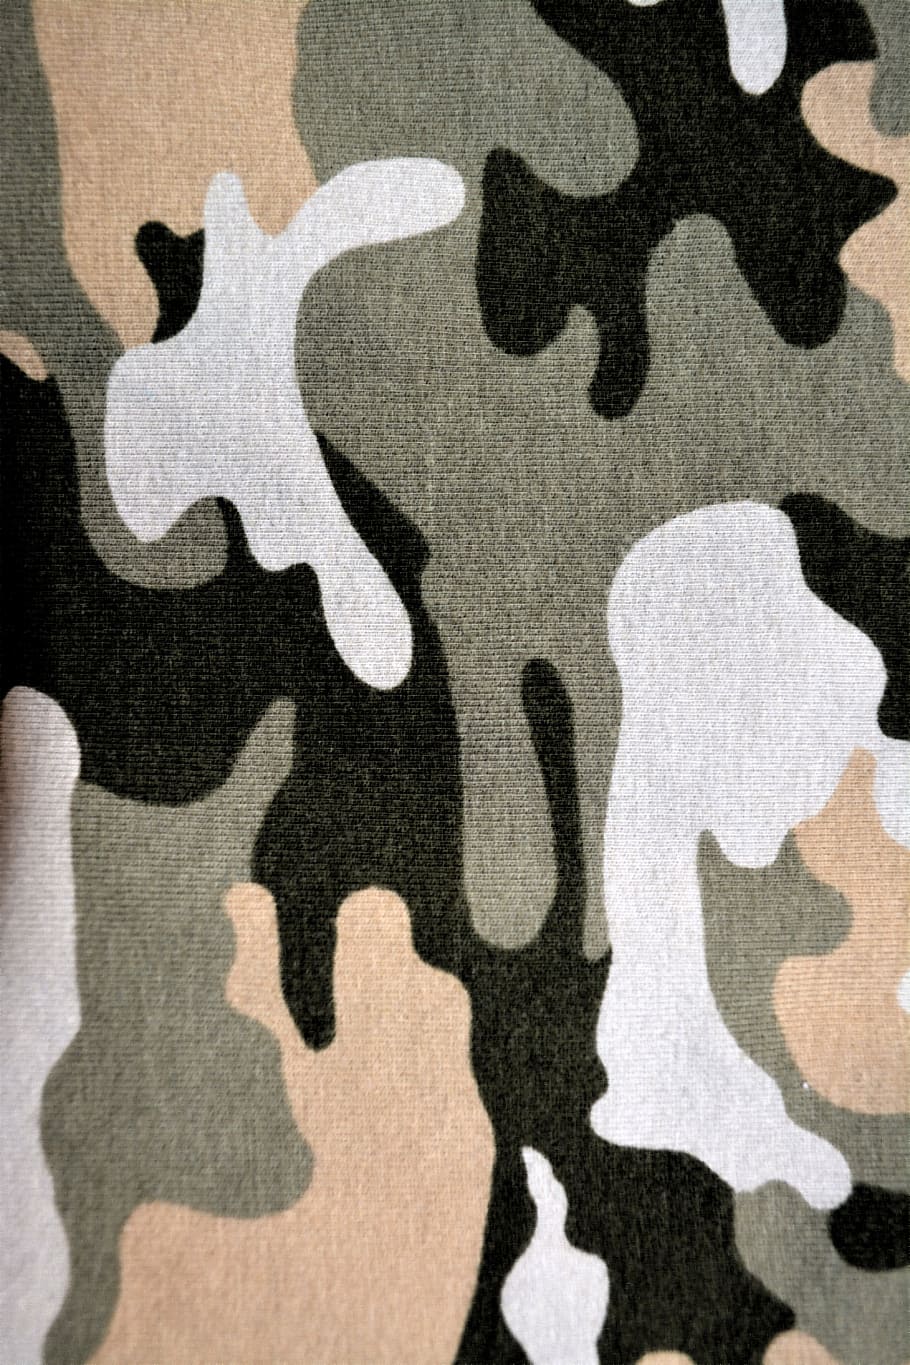 close-up photo, camouflage pattern cloth, camouflage, pattern, military, textile, material, uniform, fabric, khaki